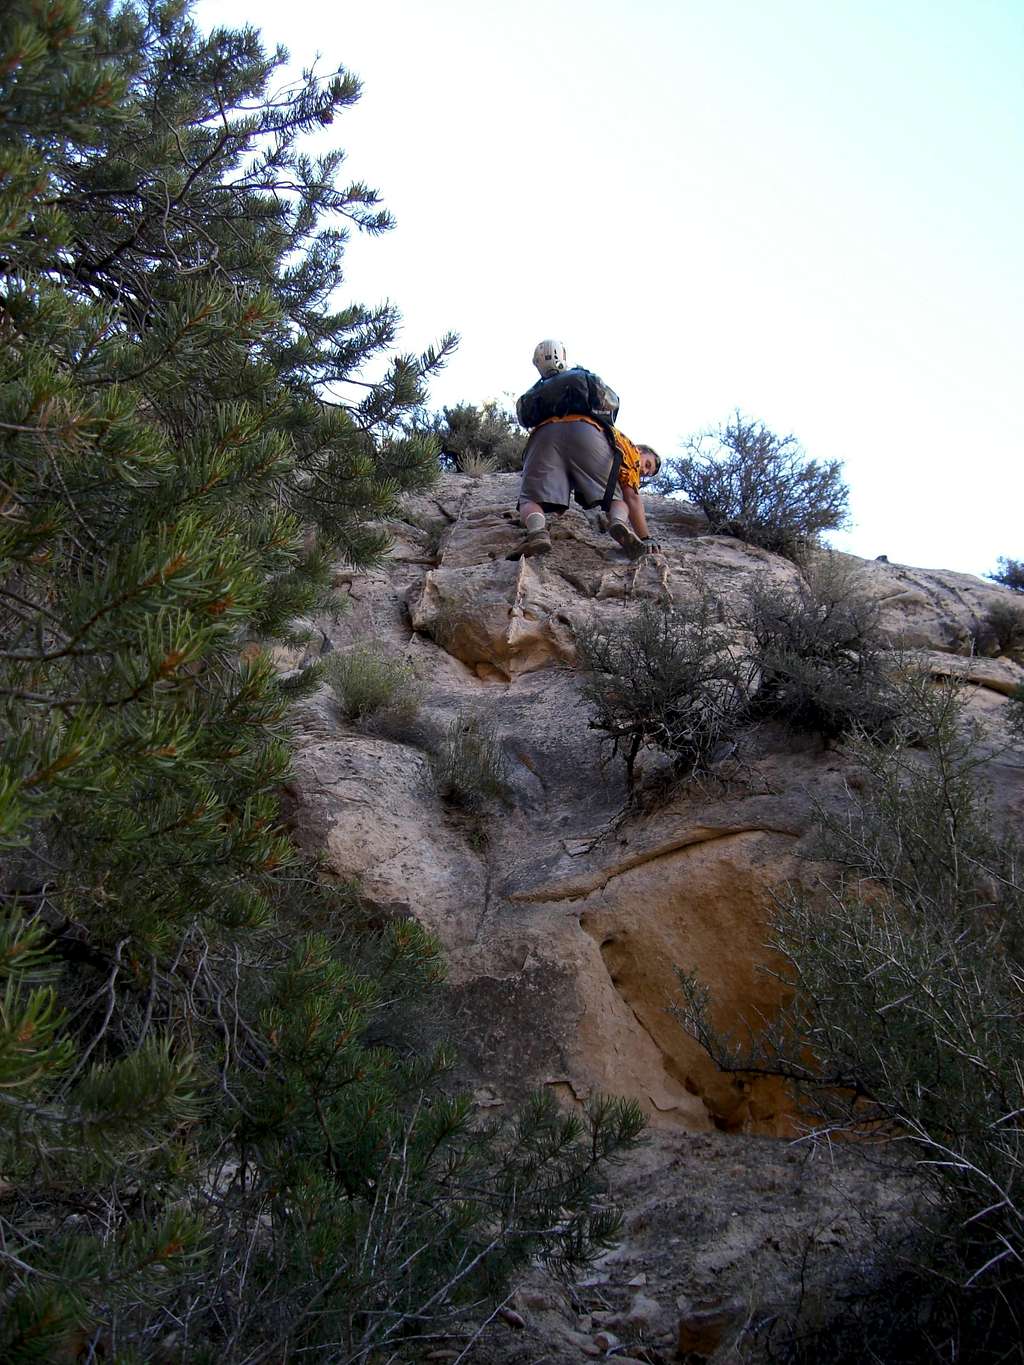 Beginning of the scrambling section